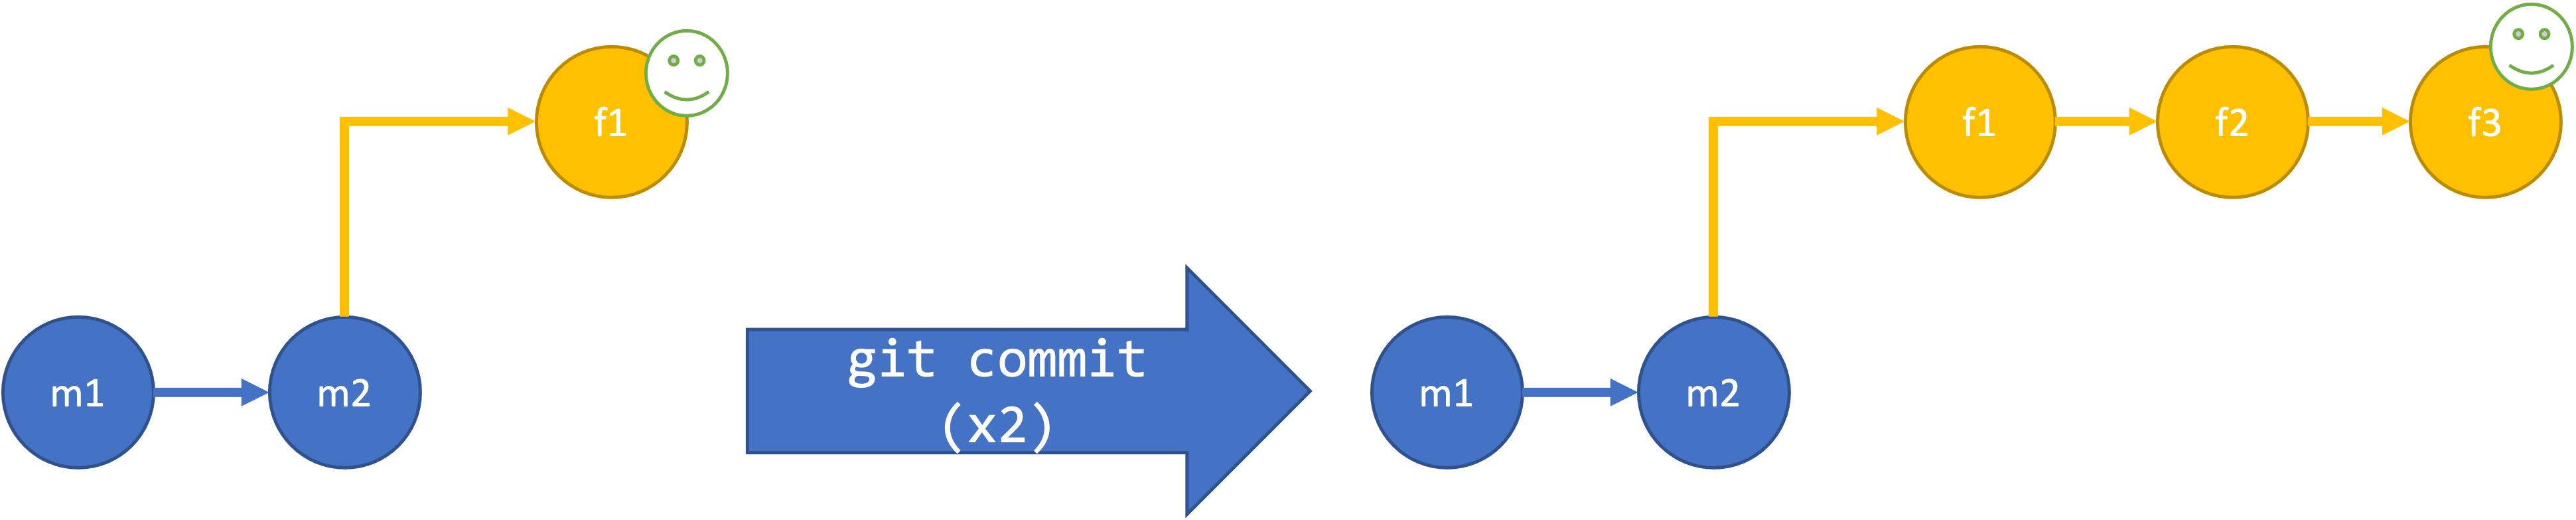 Figure creating commits on a branch. First a graph diagram of a repository is shown with two commits on the main branch and one on a feature branch. To the left is an arrow with the text "git commit (x2)", followed by the same repository with to additional commits on the feature branch. A smiley face is used on each diagram to show where you are in the repository, each on the last commit on the feature branch.